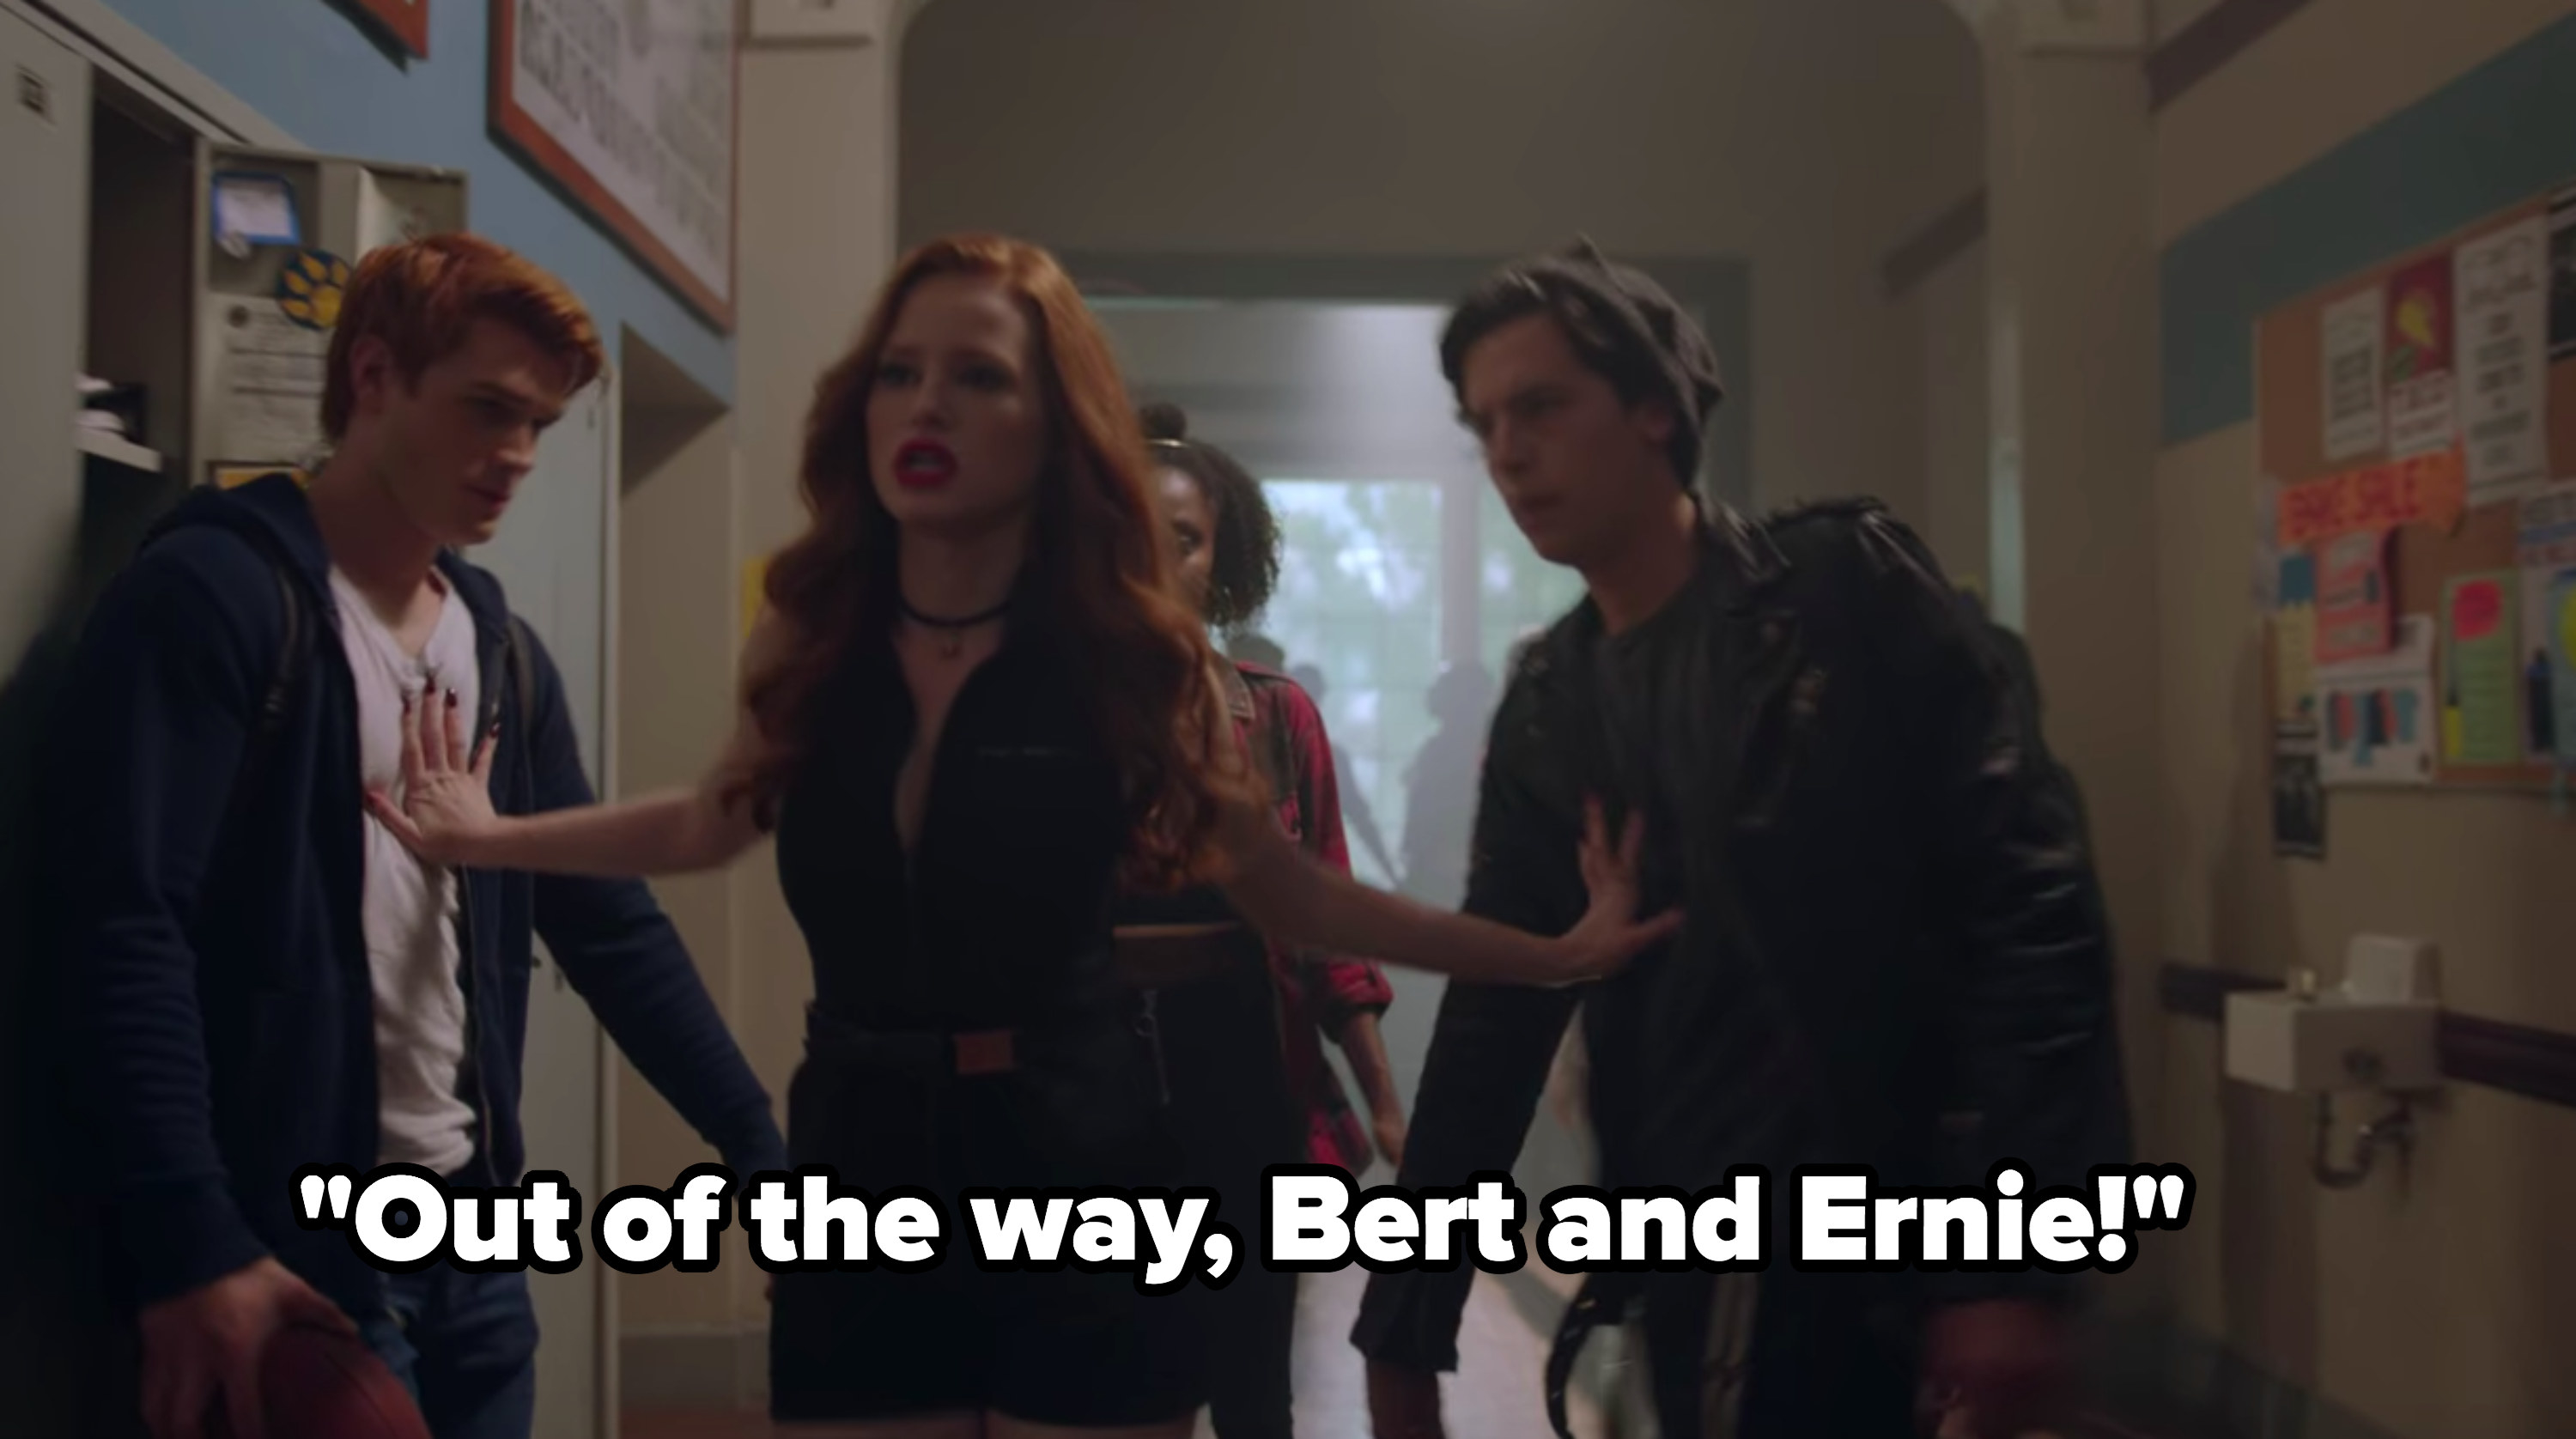 Cheryl pushes Archie and Jughead out of the way: &quot;Out of the way Bert and Ernie&quot;